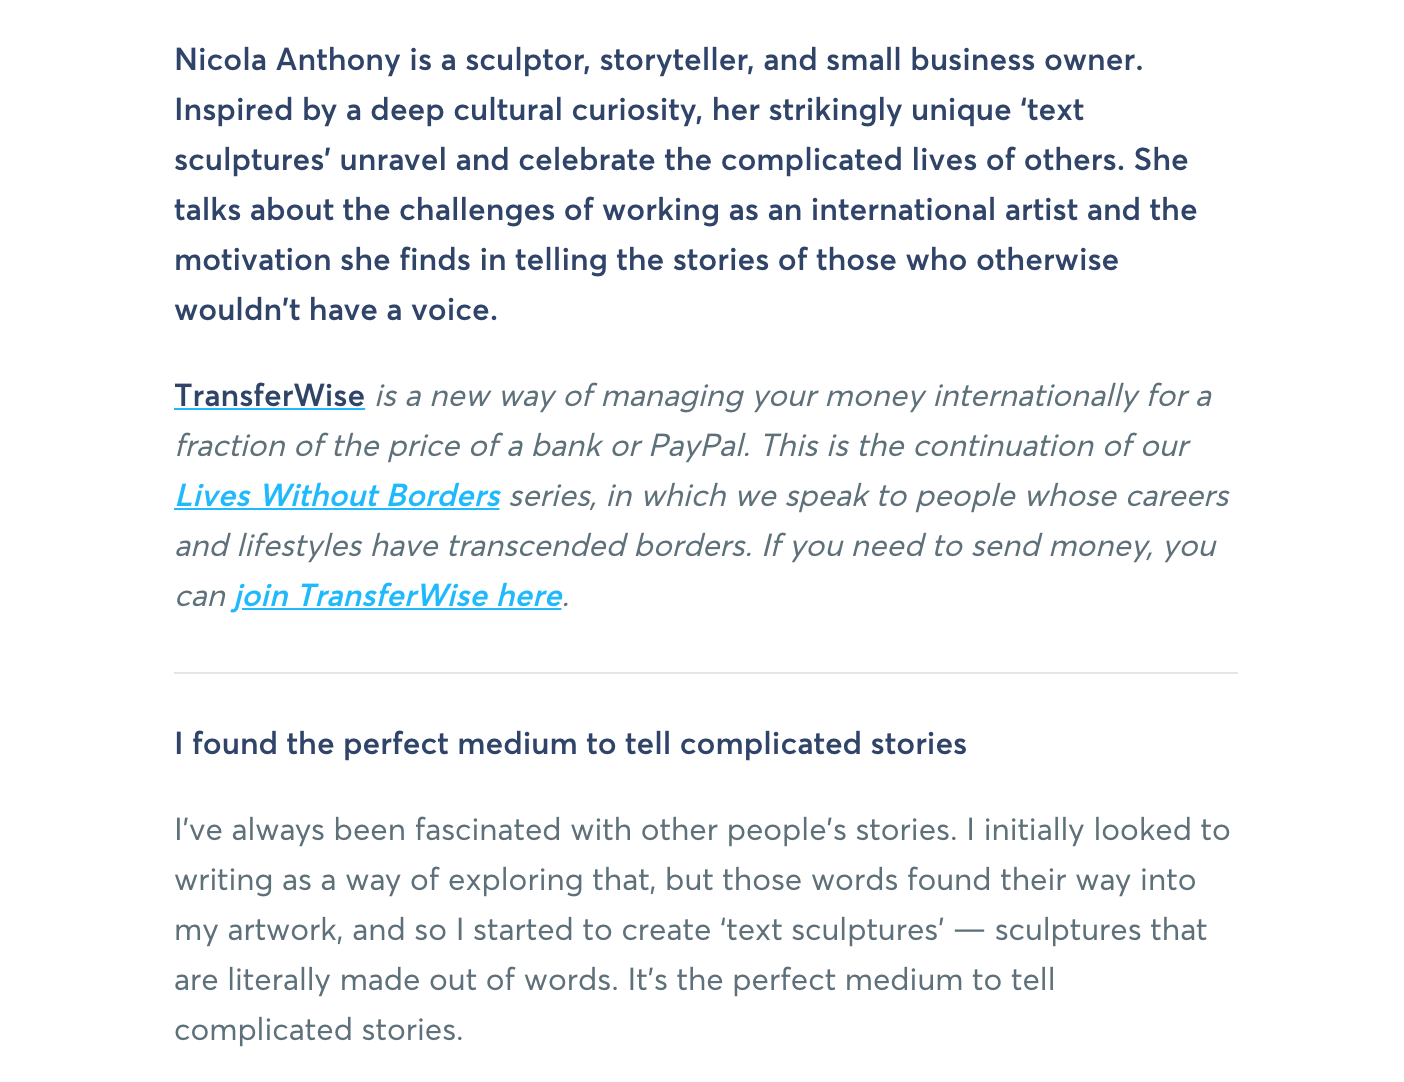 1-7-2020-TransferWise-NicolaAnthony-Feature-Lockdown-Page2.png